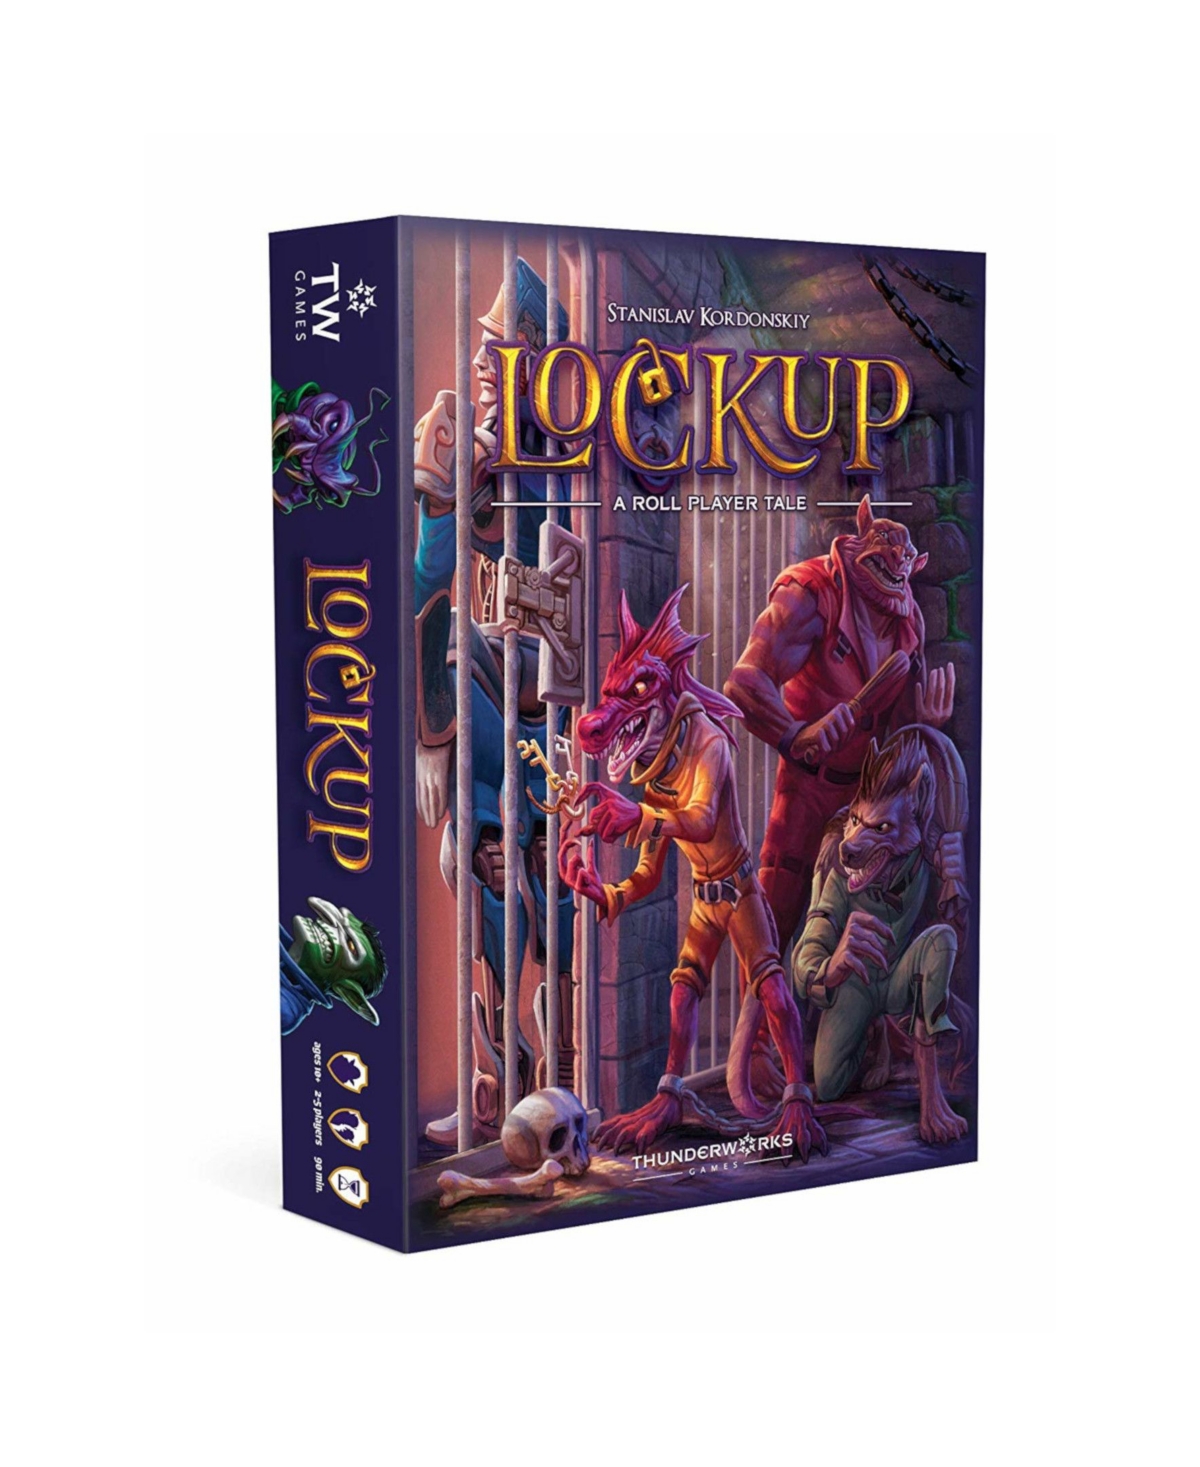 Masterpieces Puzzles Flat River Group Thunderworks Games Lockup- A Roll Player Tale Competitive Worker-allocation Game In Multi